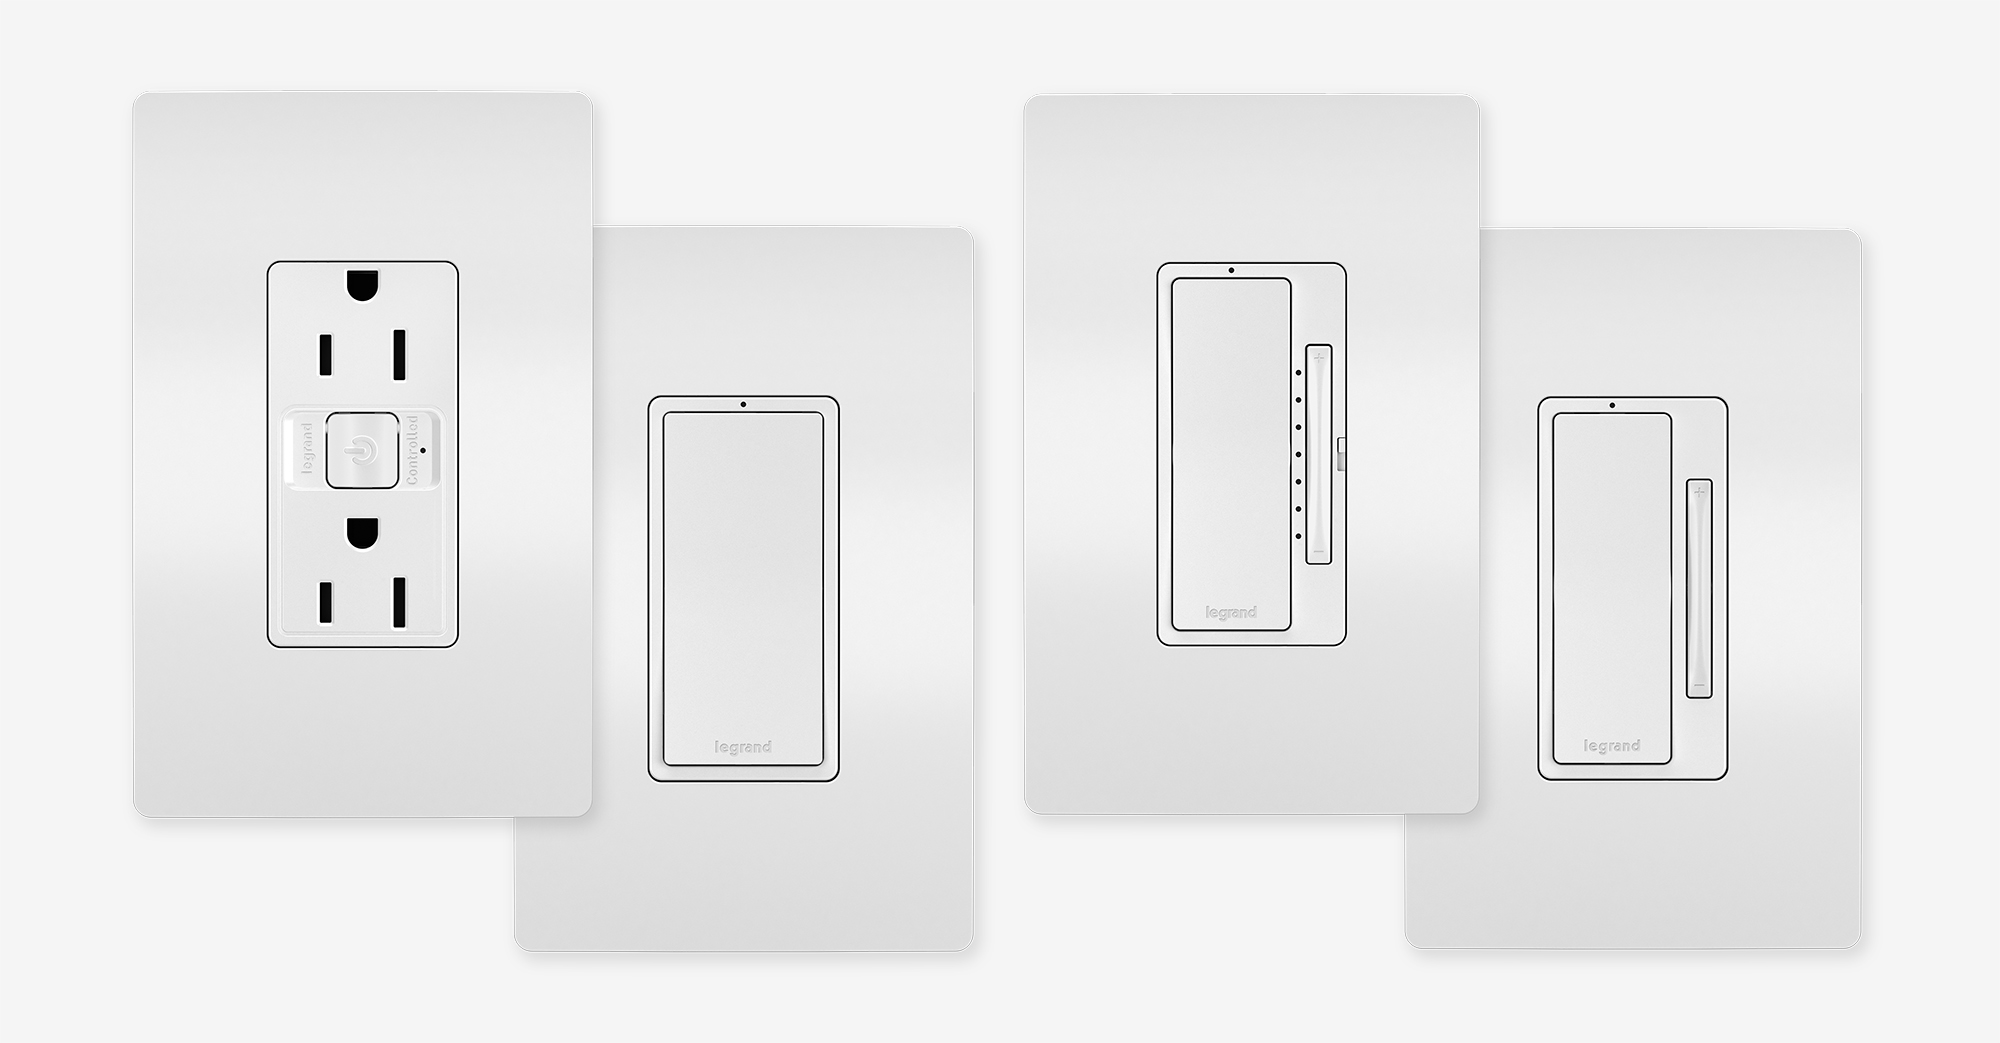 Smart lighting switches by Legrand